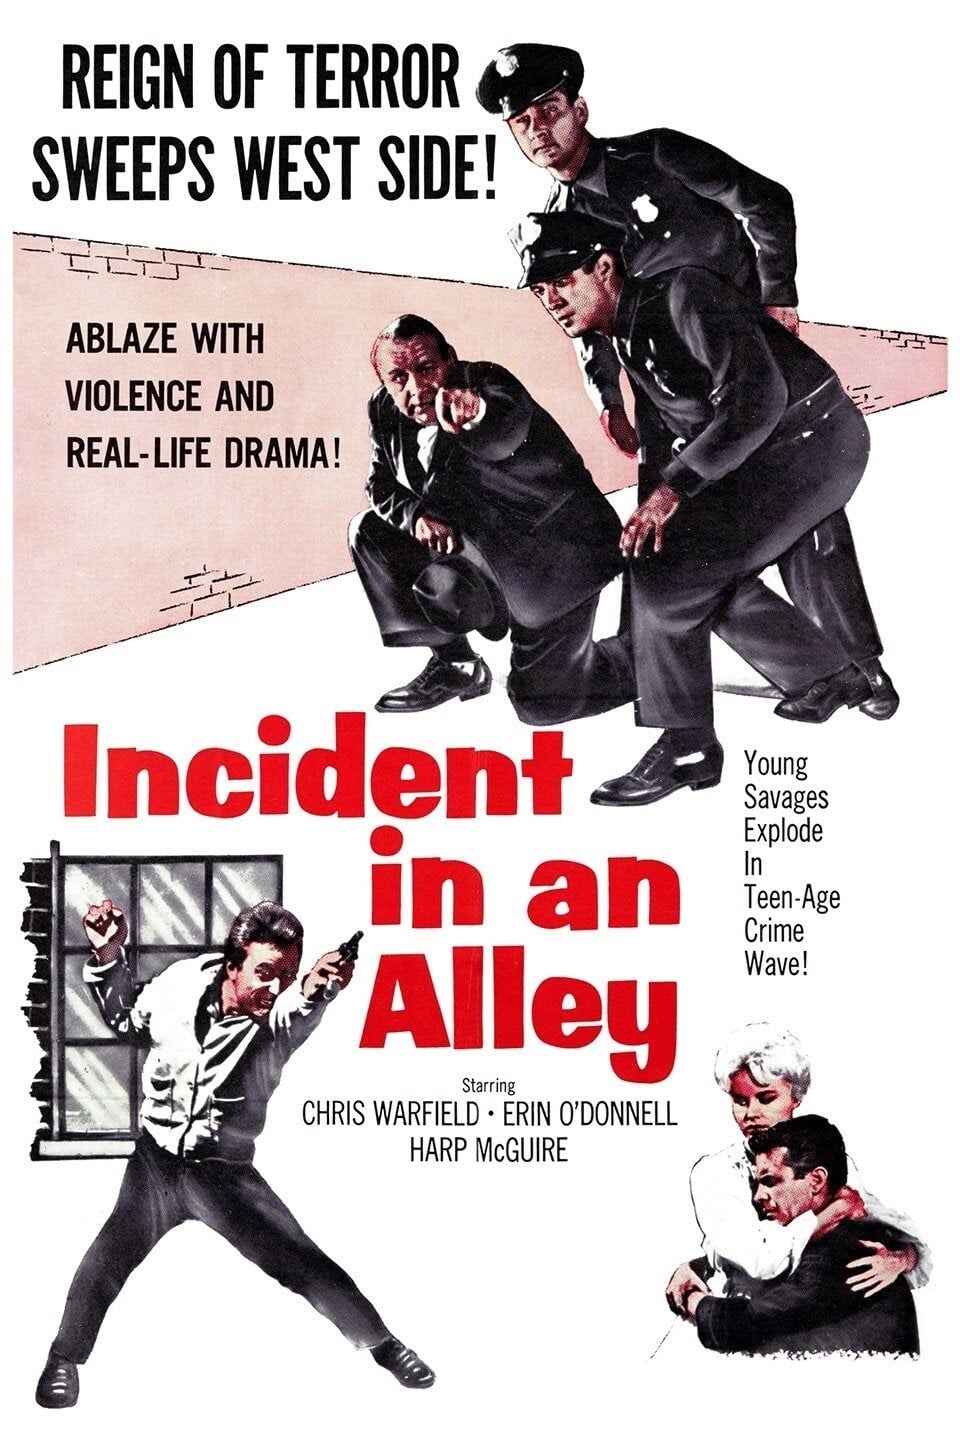 Incident in an Alley